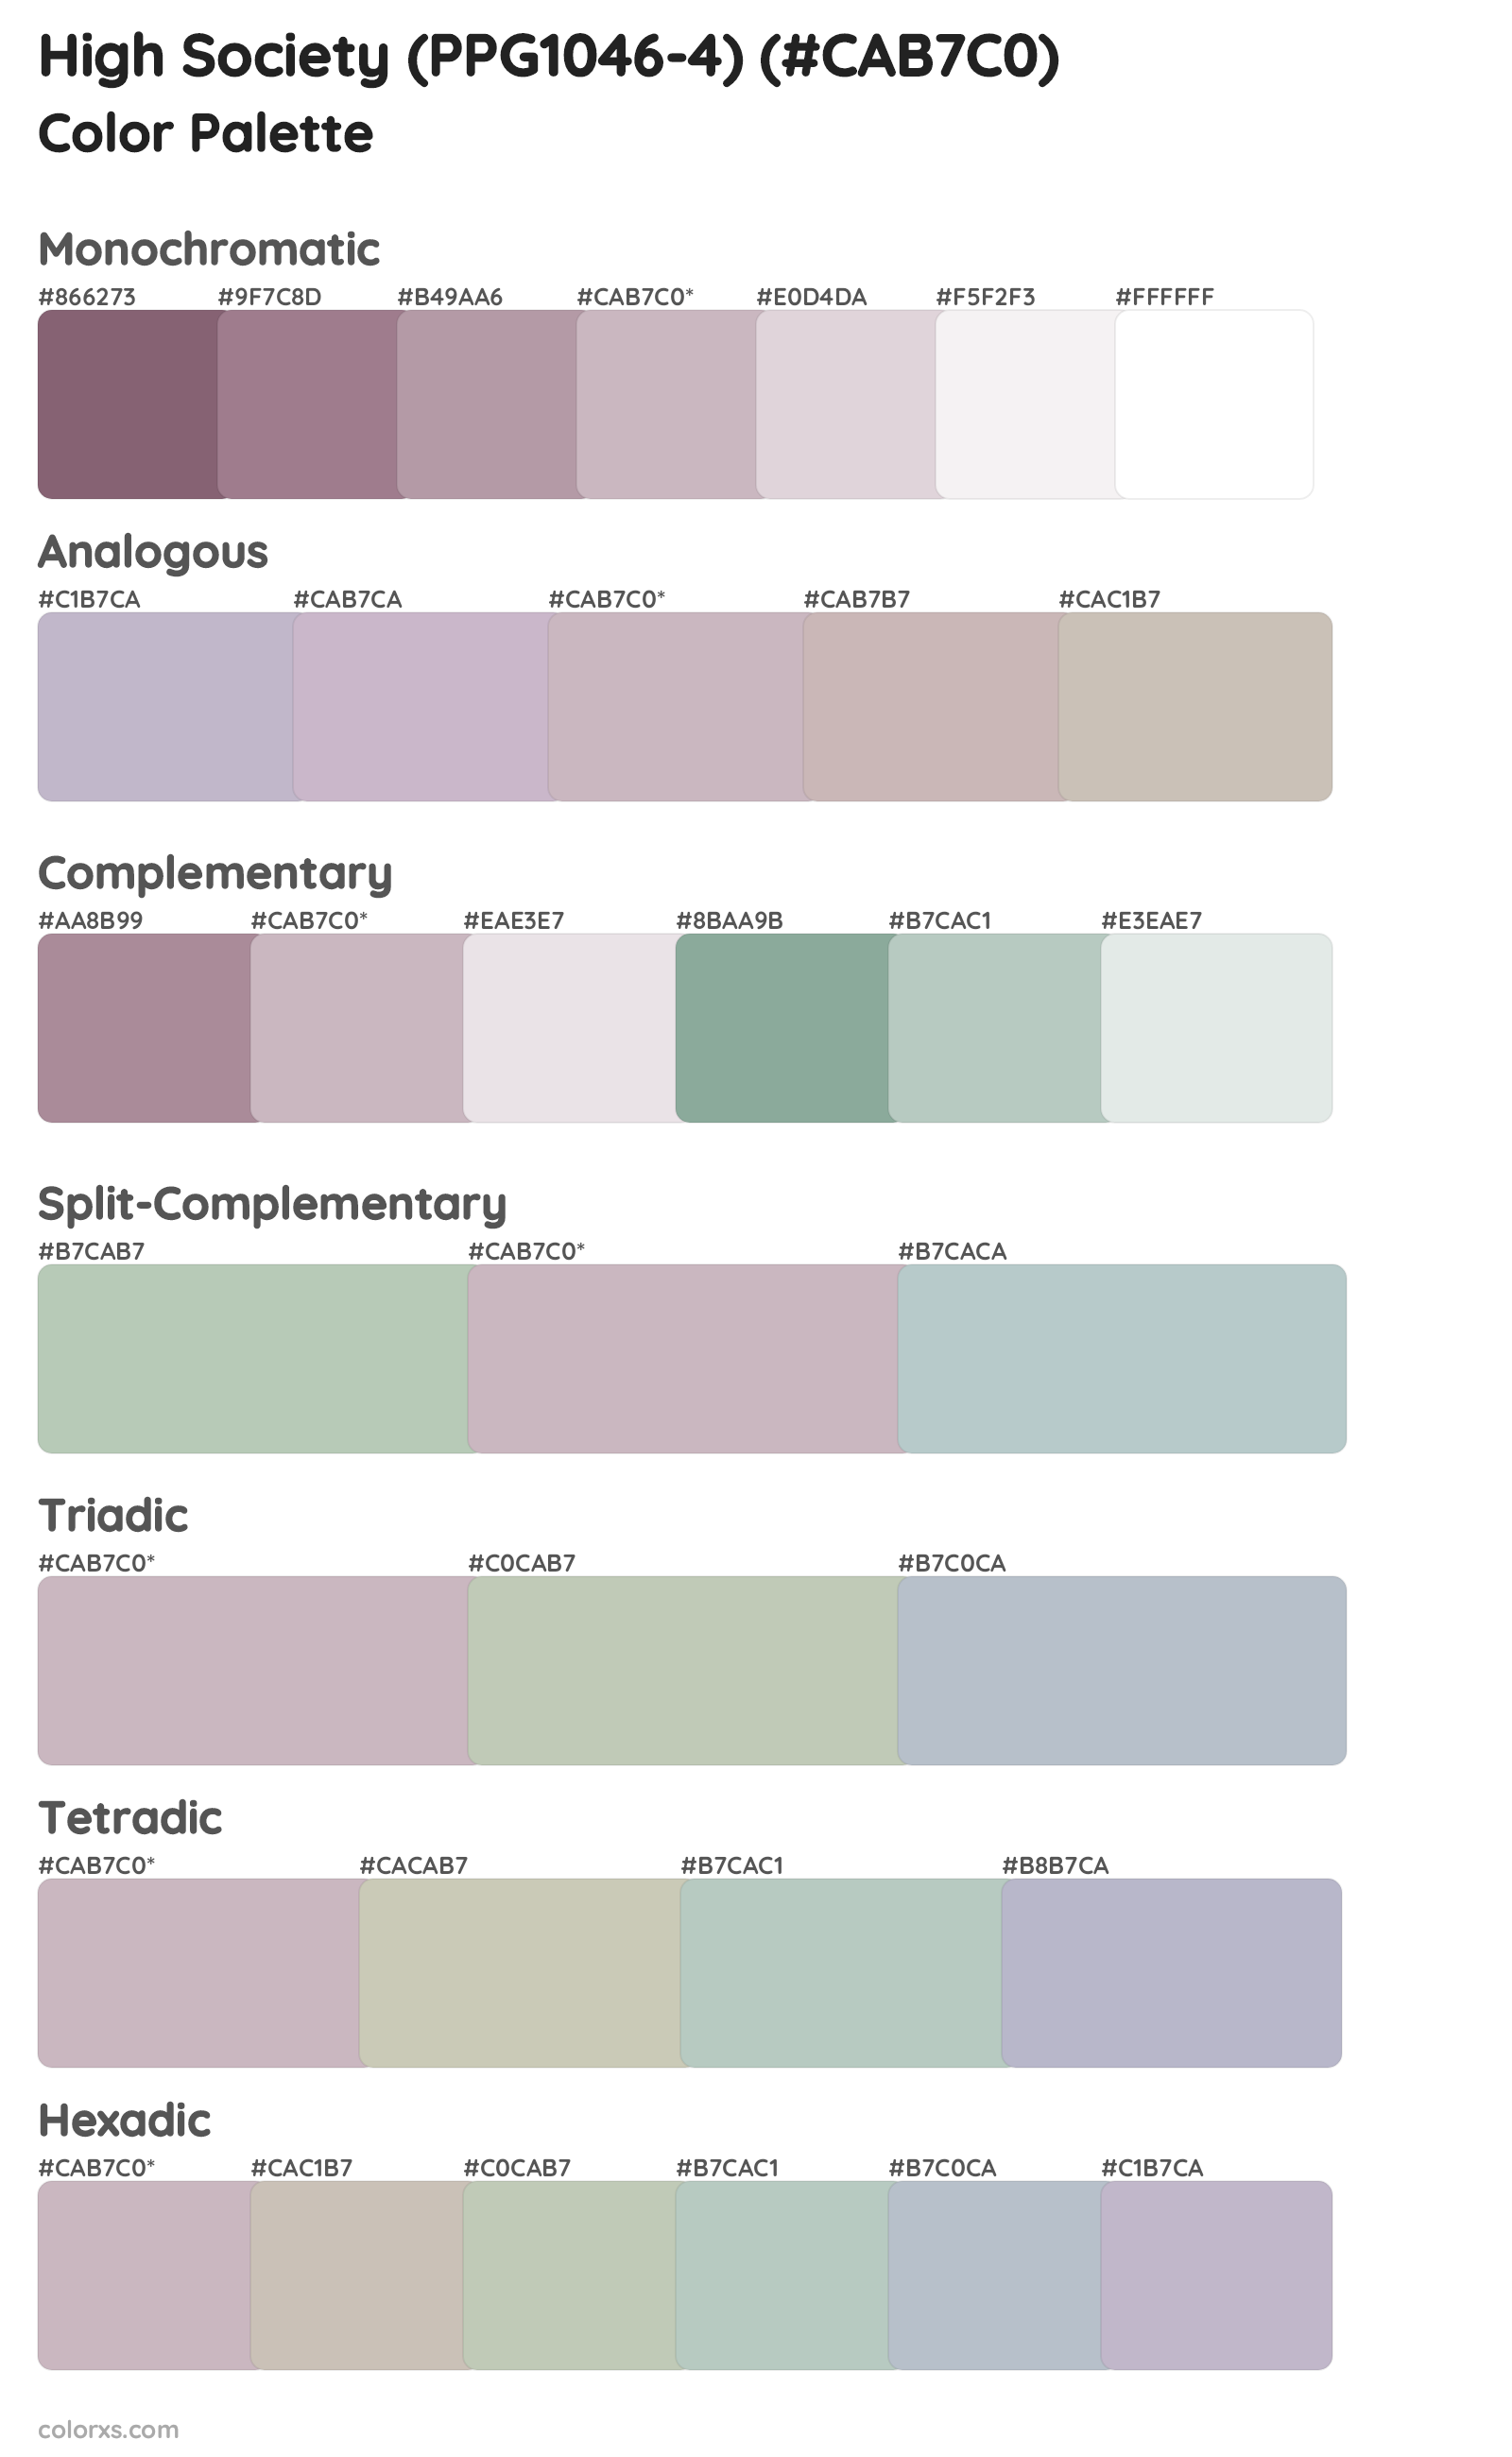 High Society (PPG1046-4) Color Scheme Palettes